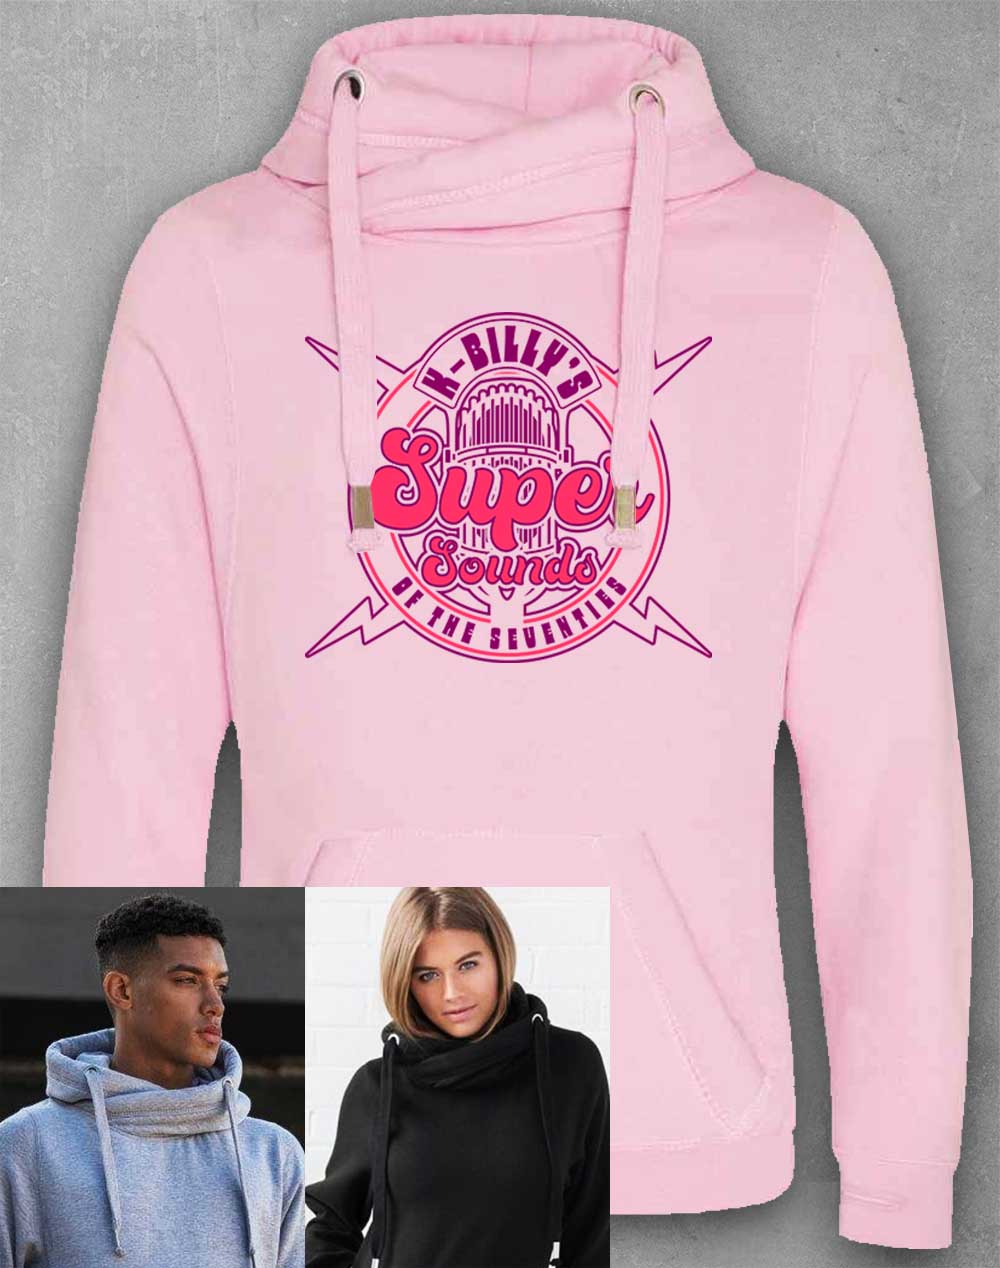 Baby Pink - K-Billy's Super Sounds of the 70's Chunky Cross Neck Hoodie